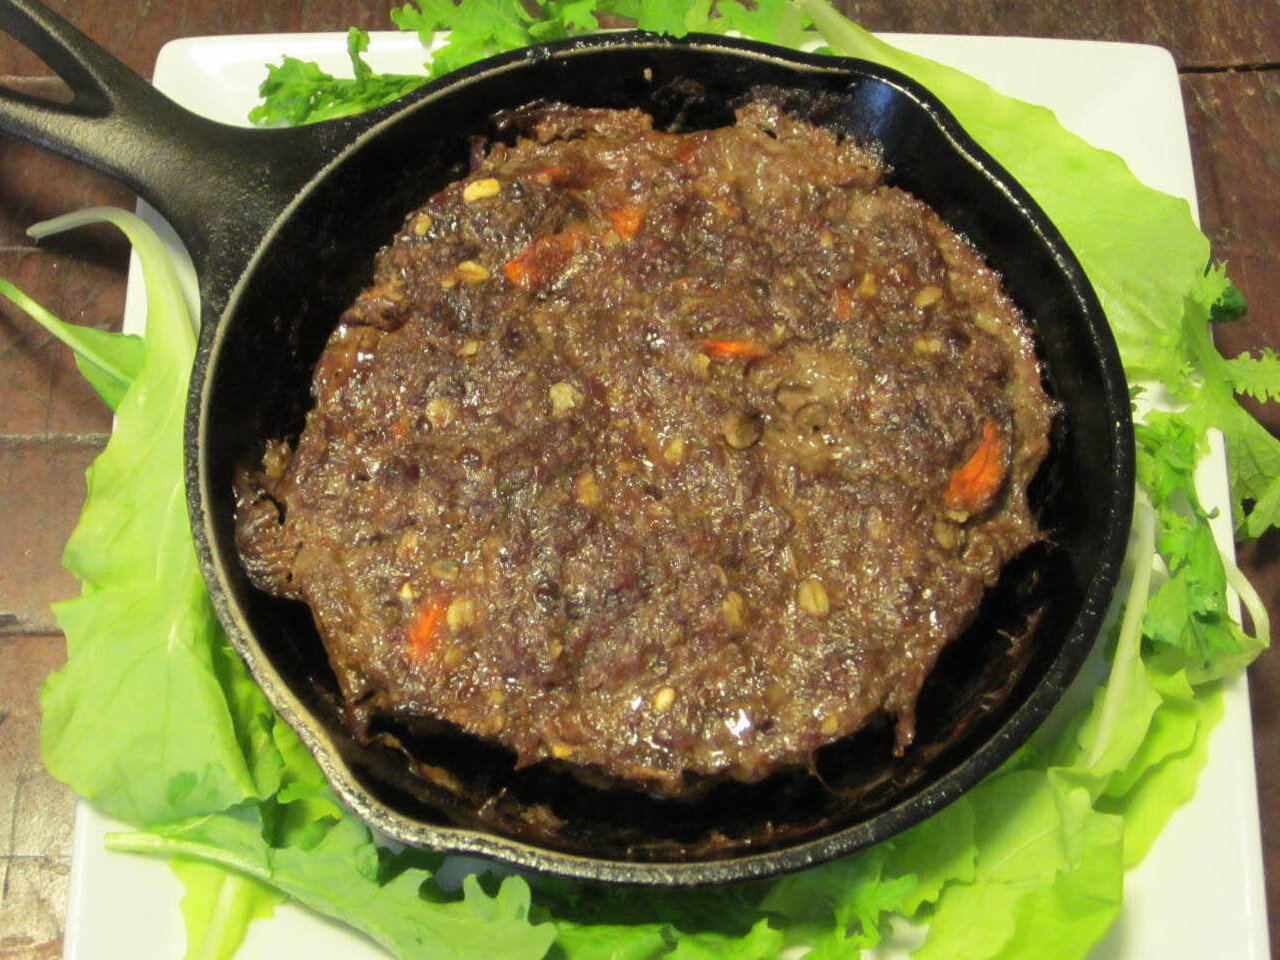 Meatloaf in a cast iron pan